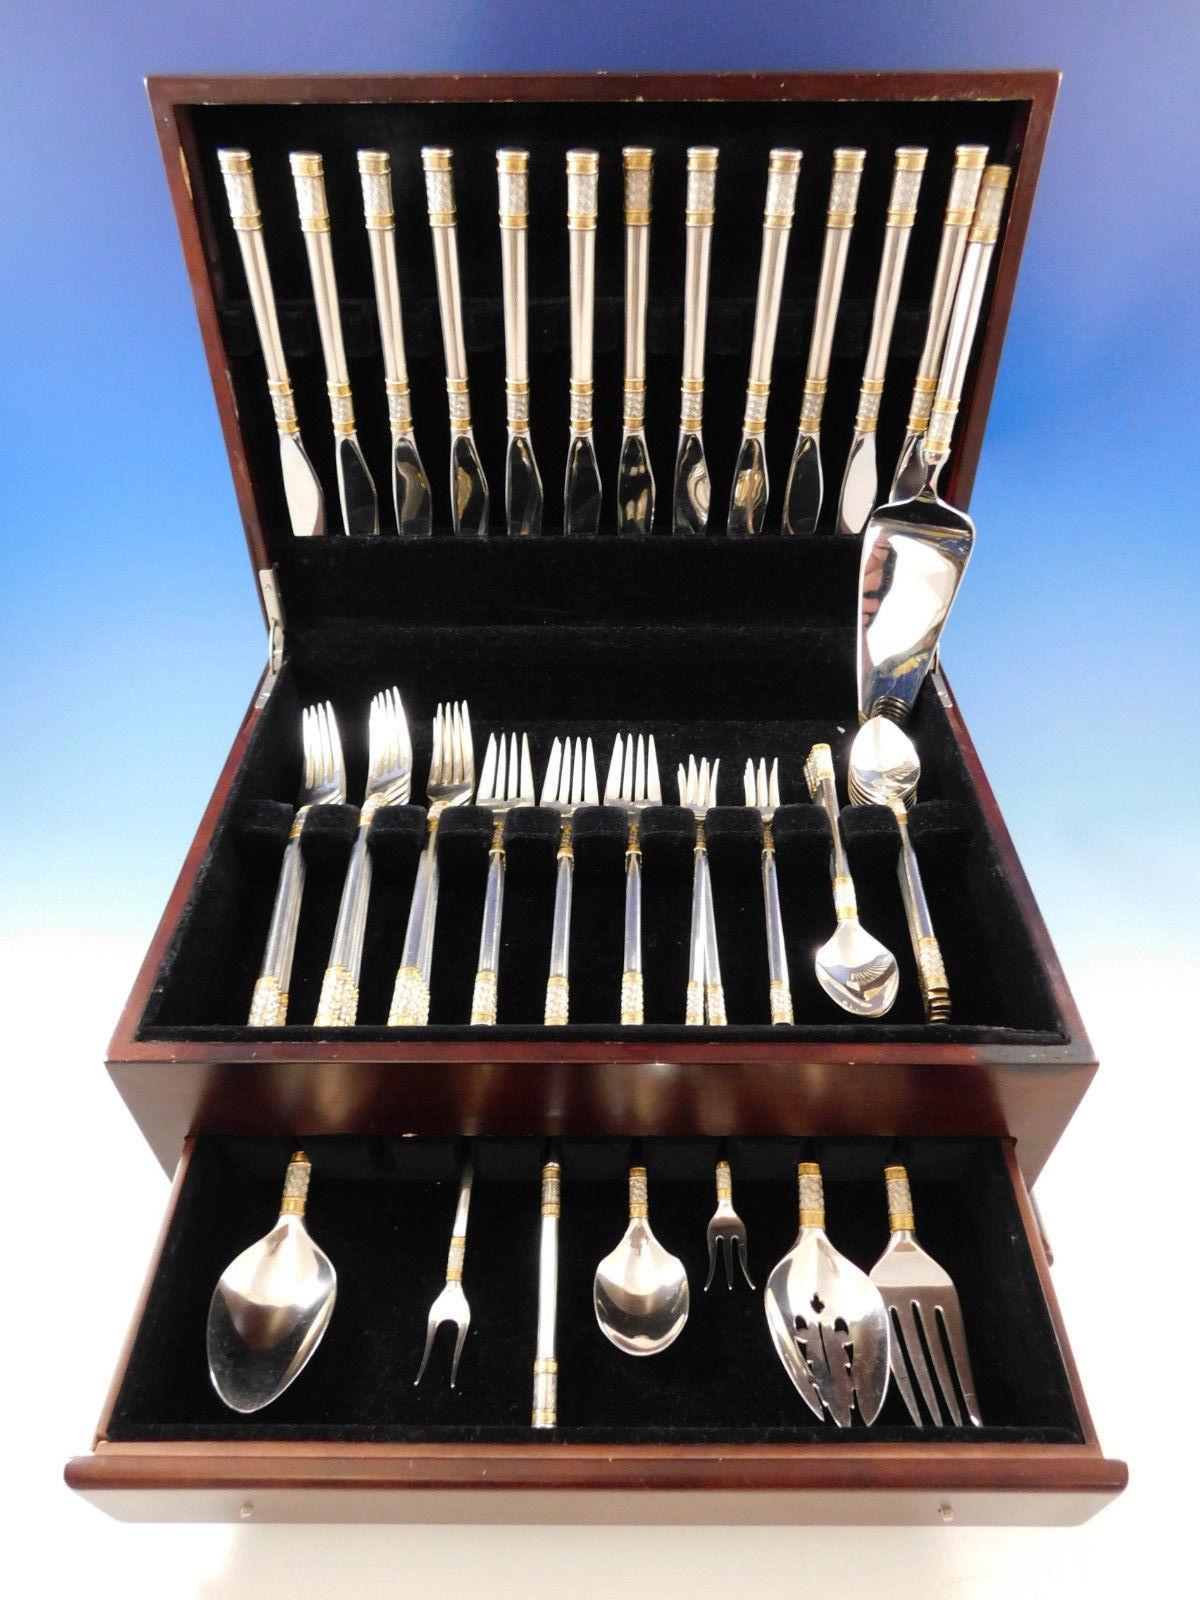 Aegean Weave Gold Accent by Wallace sterling silver flatware set, 68 pieces. This set includes:

12 knives, 9 3/8